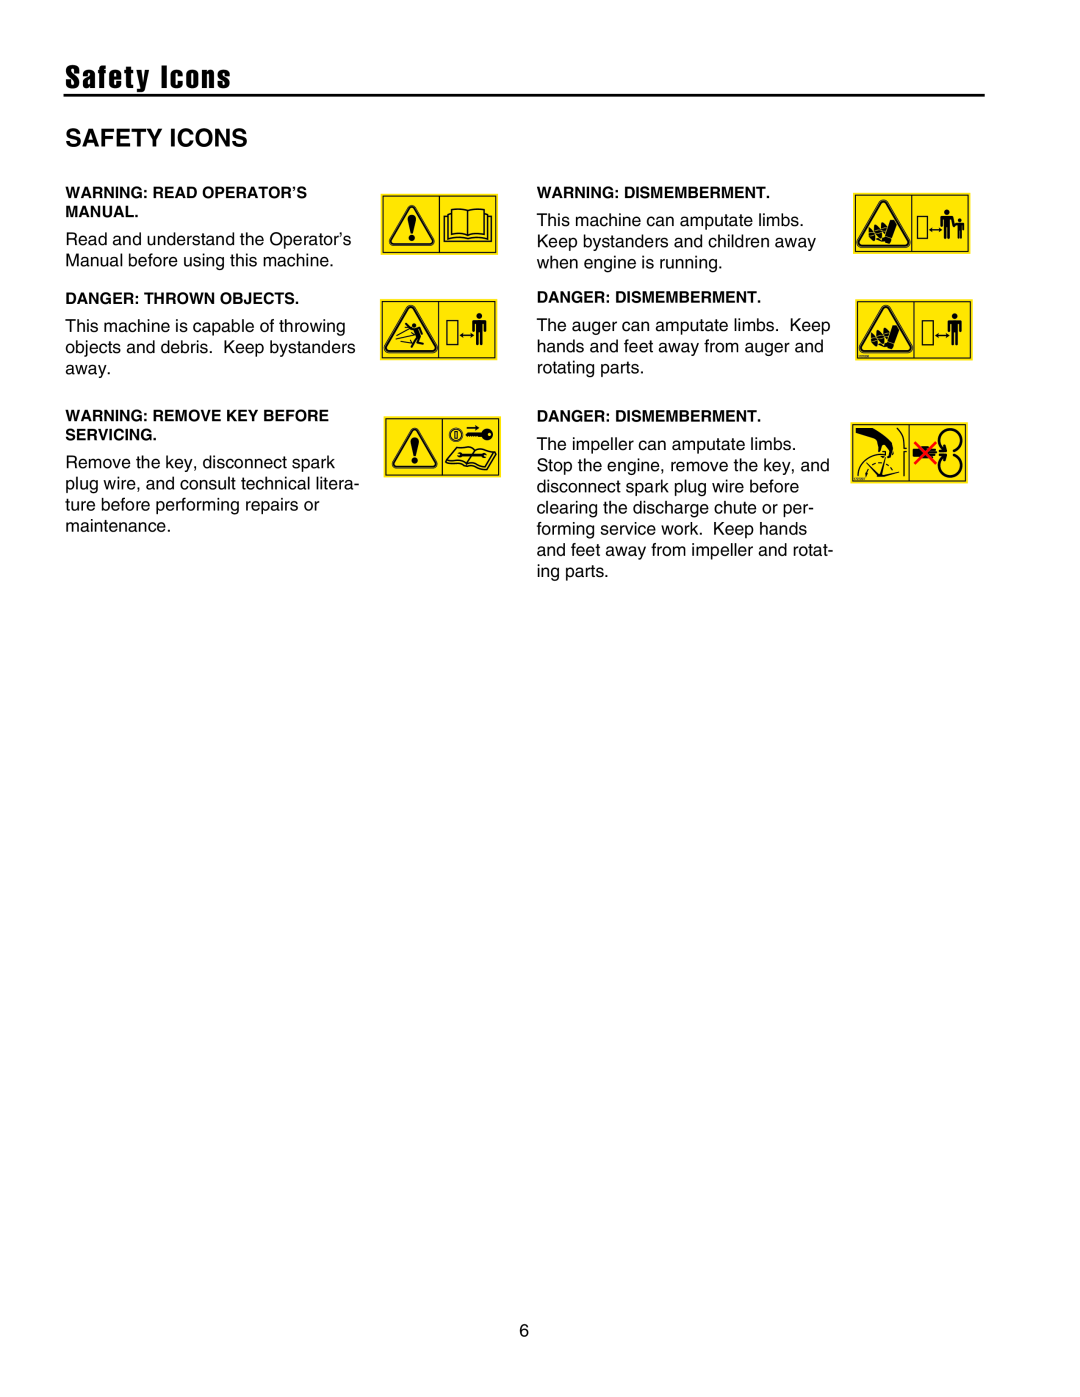 Snapper 10560, 9524, 9560, 1390, 1338, 11570, 1380, 11532, 10528 manual Safety Icons 